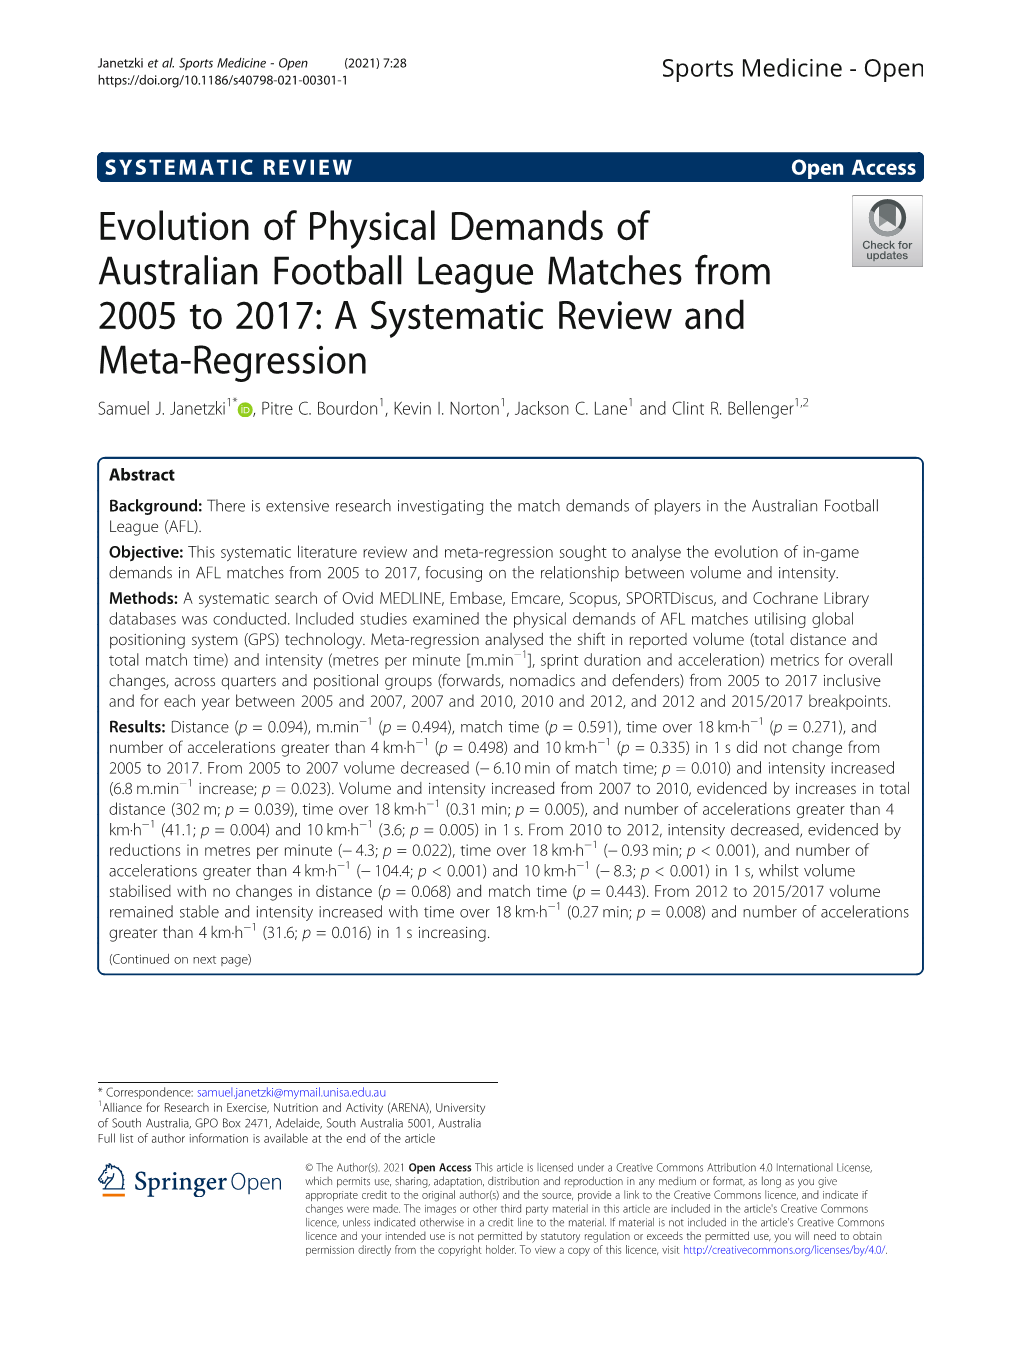 Evolution of Physical Demands of Australian Football League Matches from 2005 to 2017: a Systematic Review and Meta-Regression Samuel J